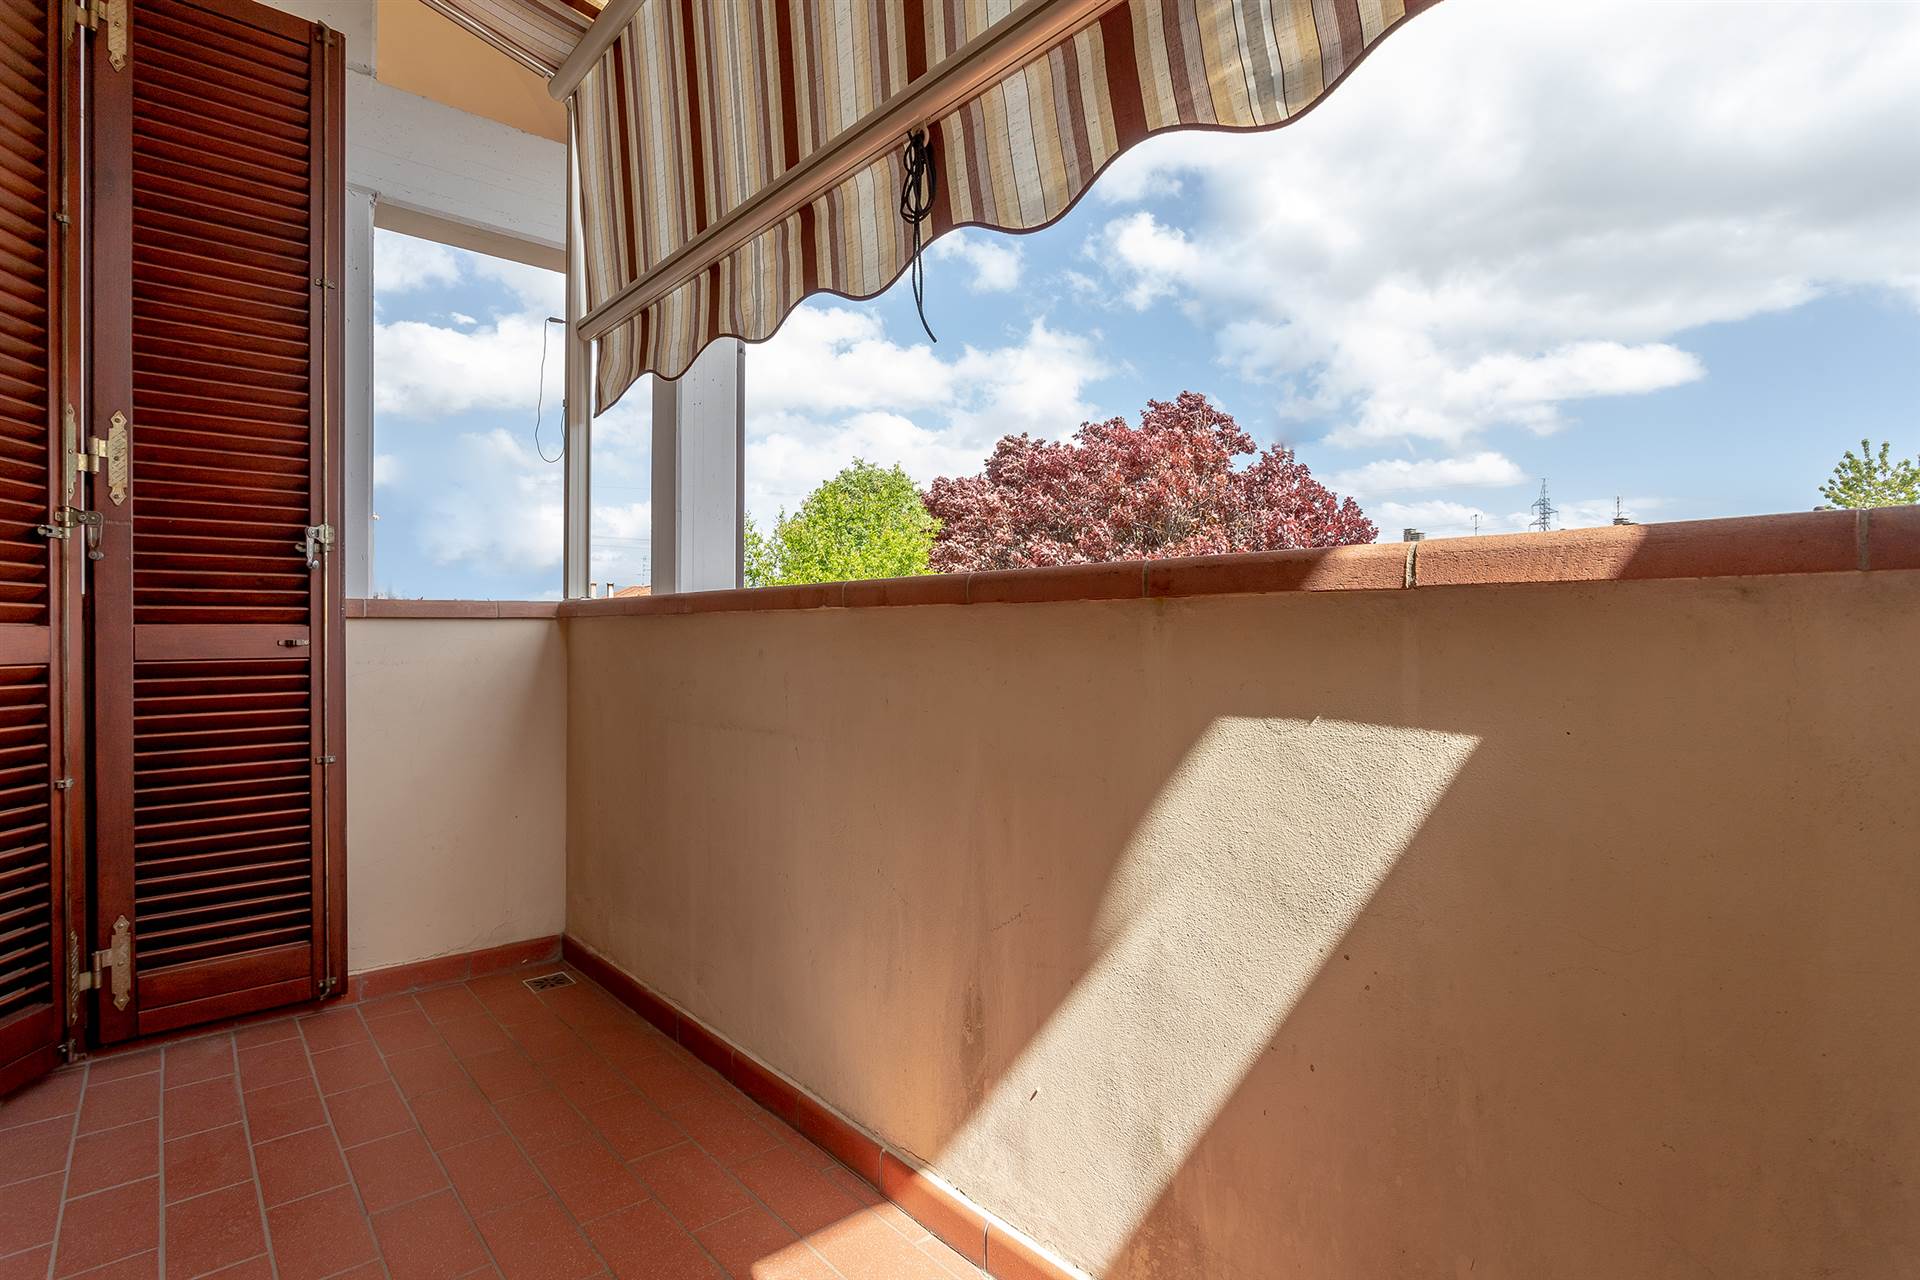 SEANO, CARMIGNANO, Apartment for sale of 58 Sq. mt., Excellent Condition, Heating Individual heating system, Energetic class: E, Epi: 110,836 kwh/m2 year, placed at 1° on 1, composed by: 3 Rooms, 